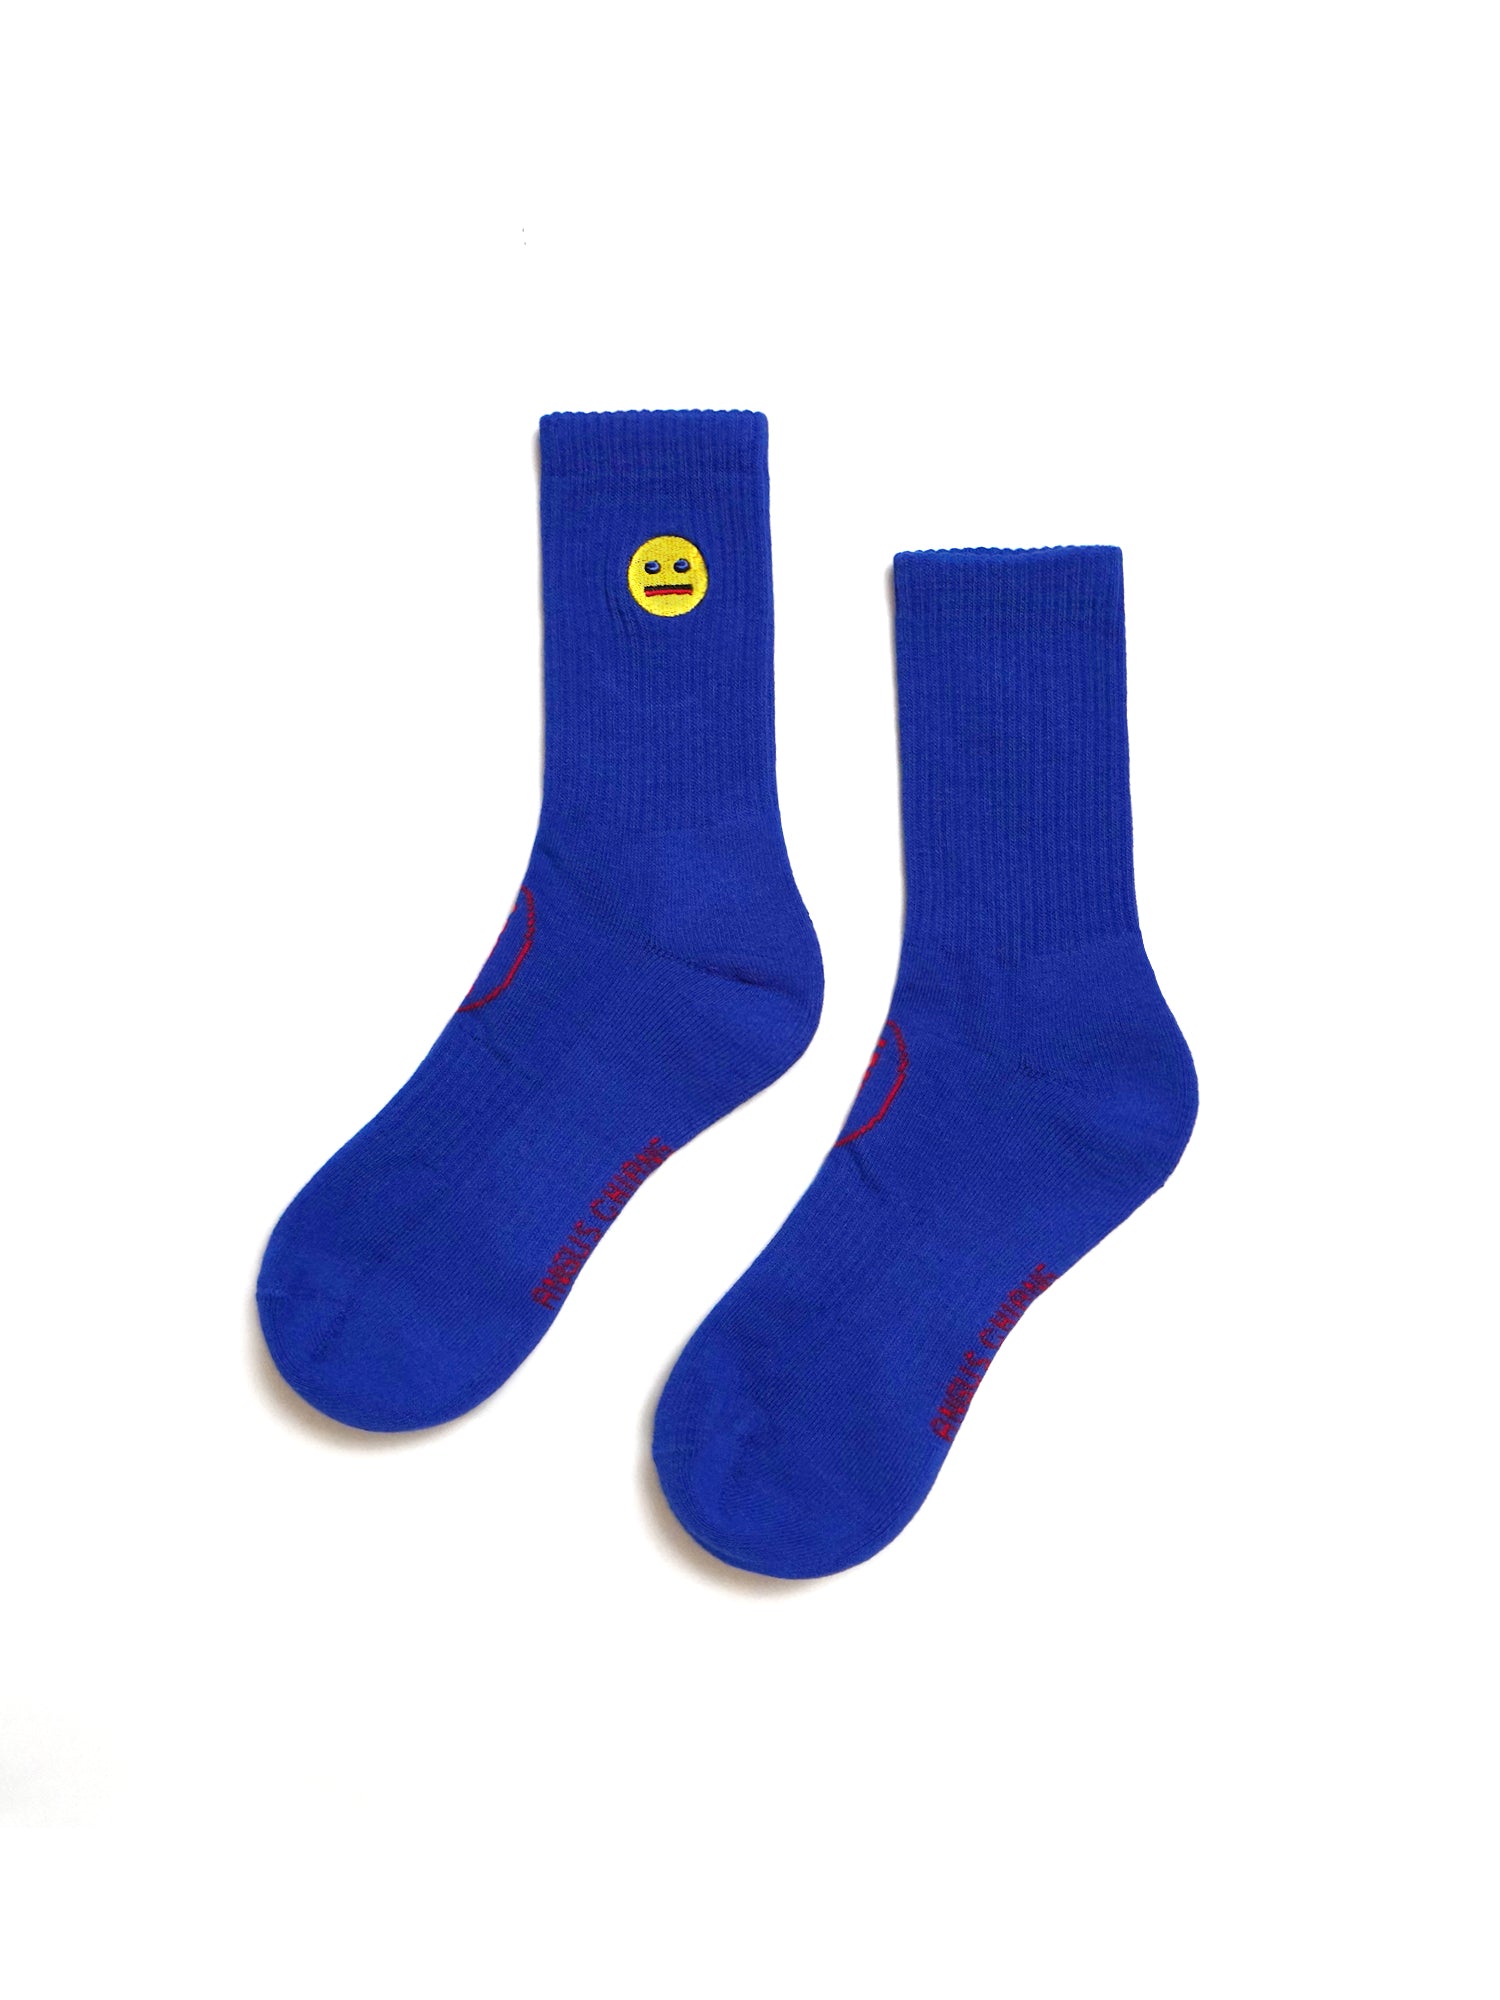 [SMILEY by ANGUS CHIANG] EMBROIDERED CREW SOCKS